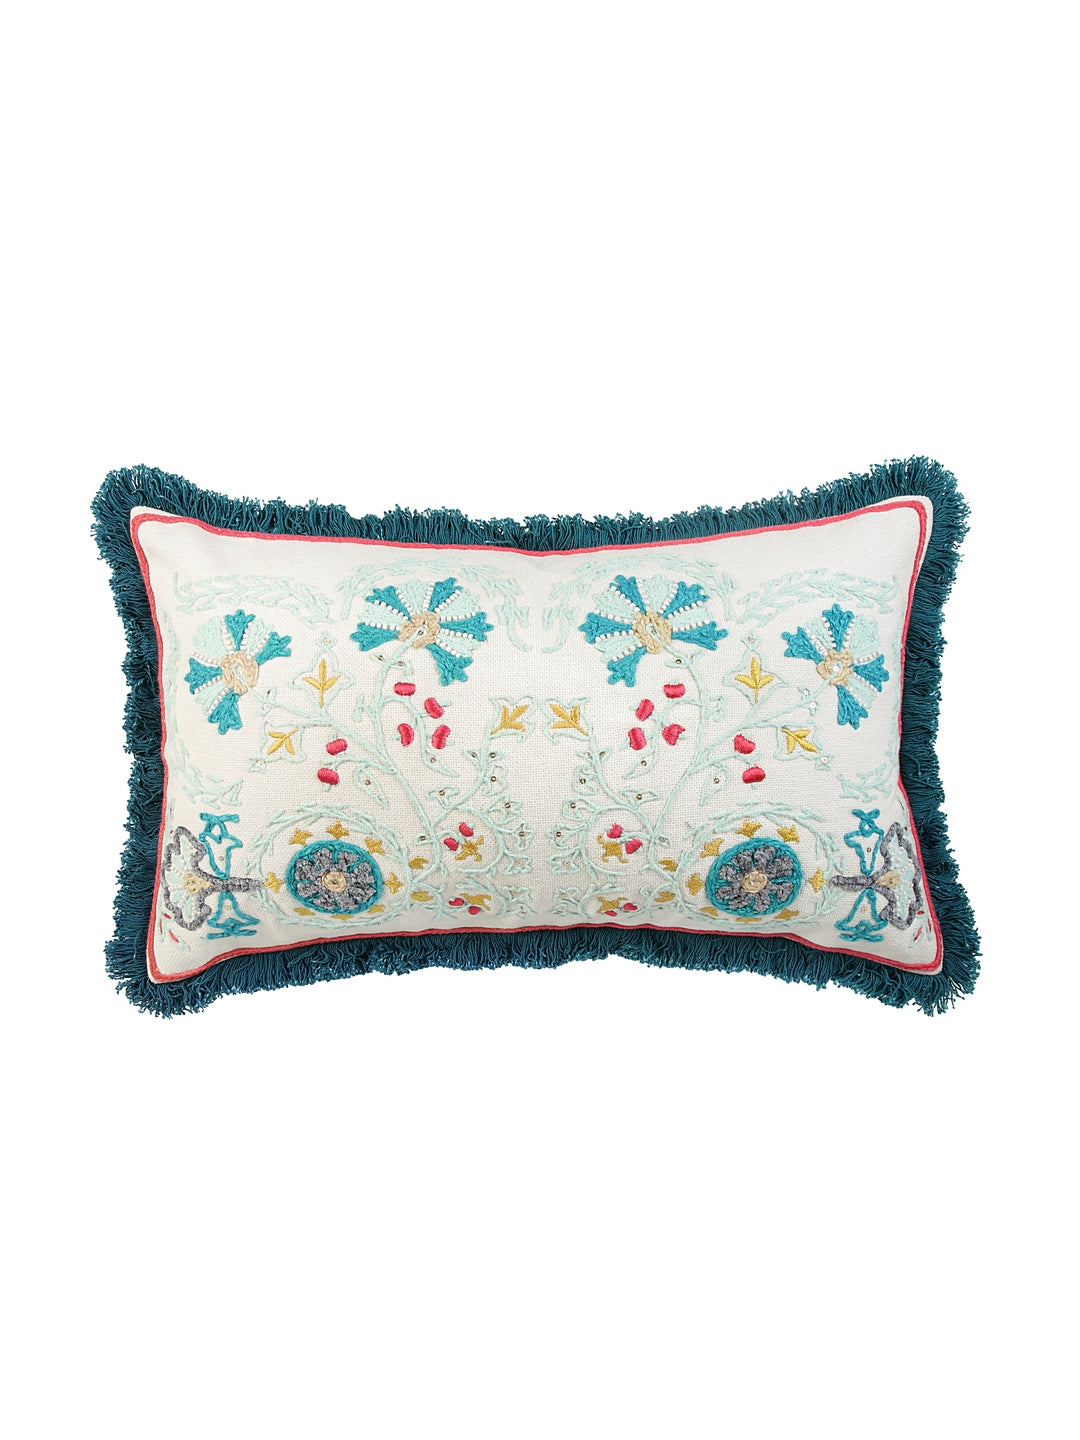 Exclusive Crewel Embroidered Cushion Cover with Filler 30x50cm